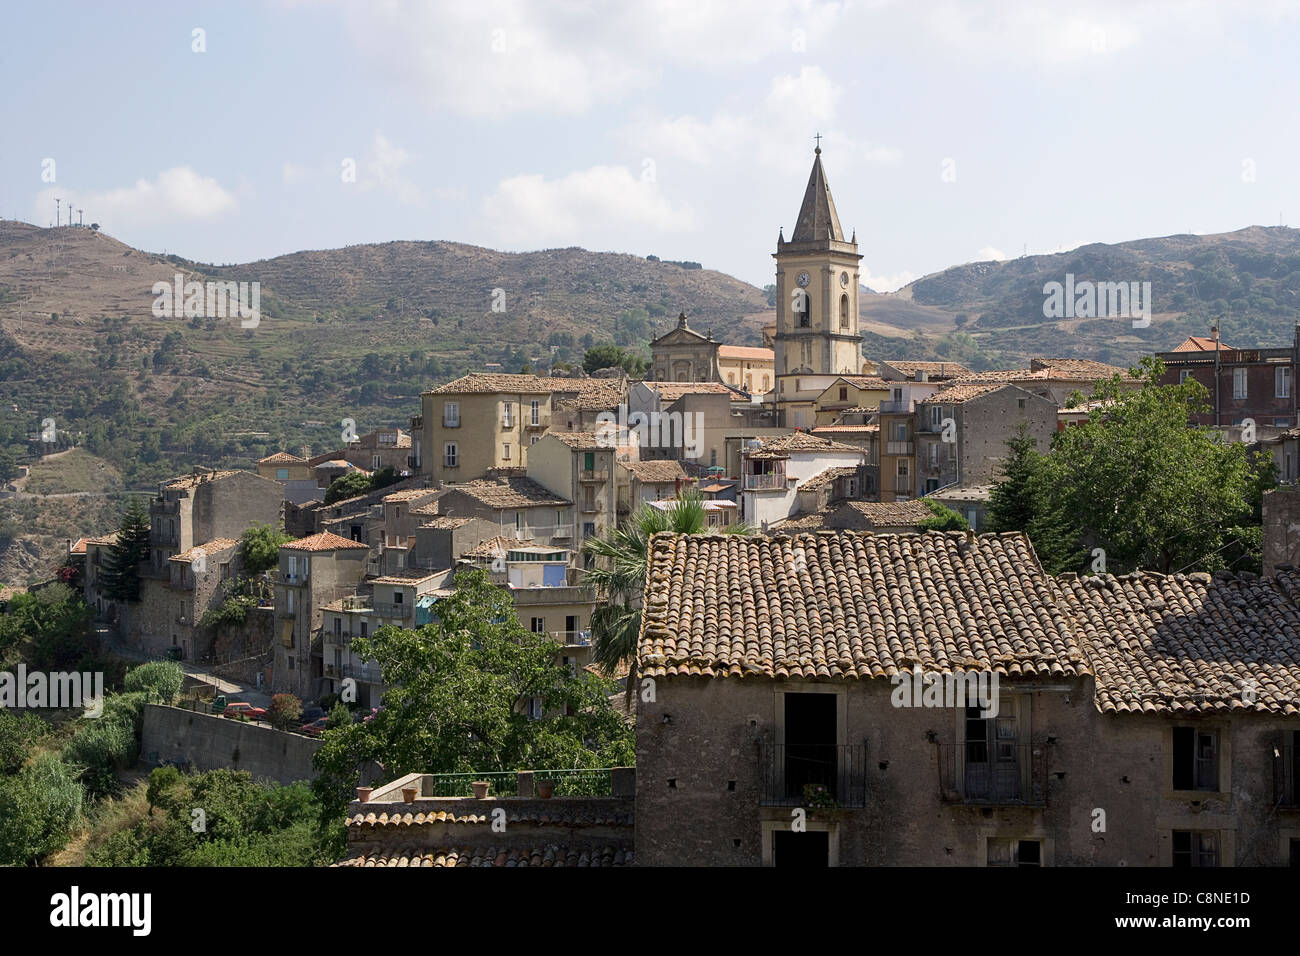 Italy, Sicily, Novara di Sicilia, view of the town nestling amongst the mountains Stock Photo